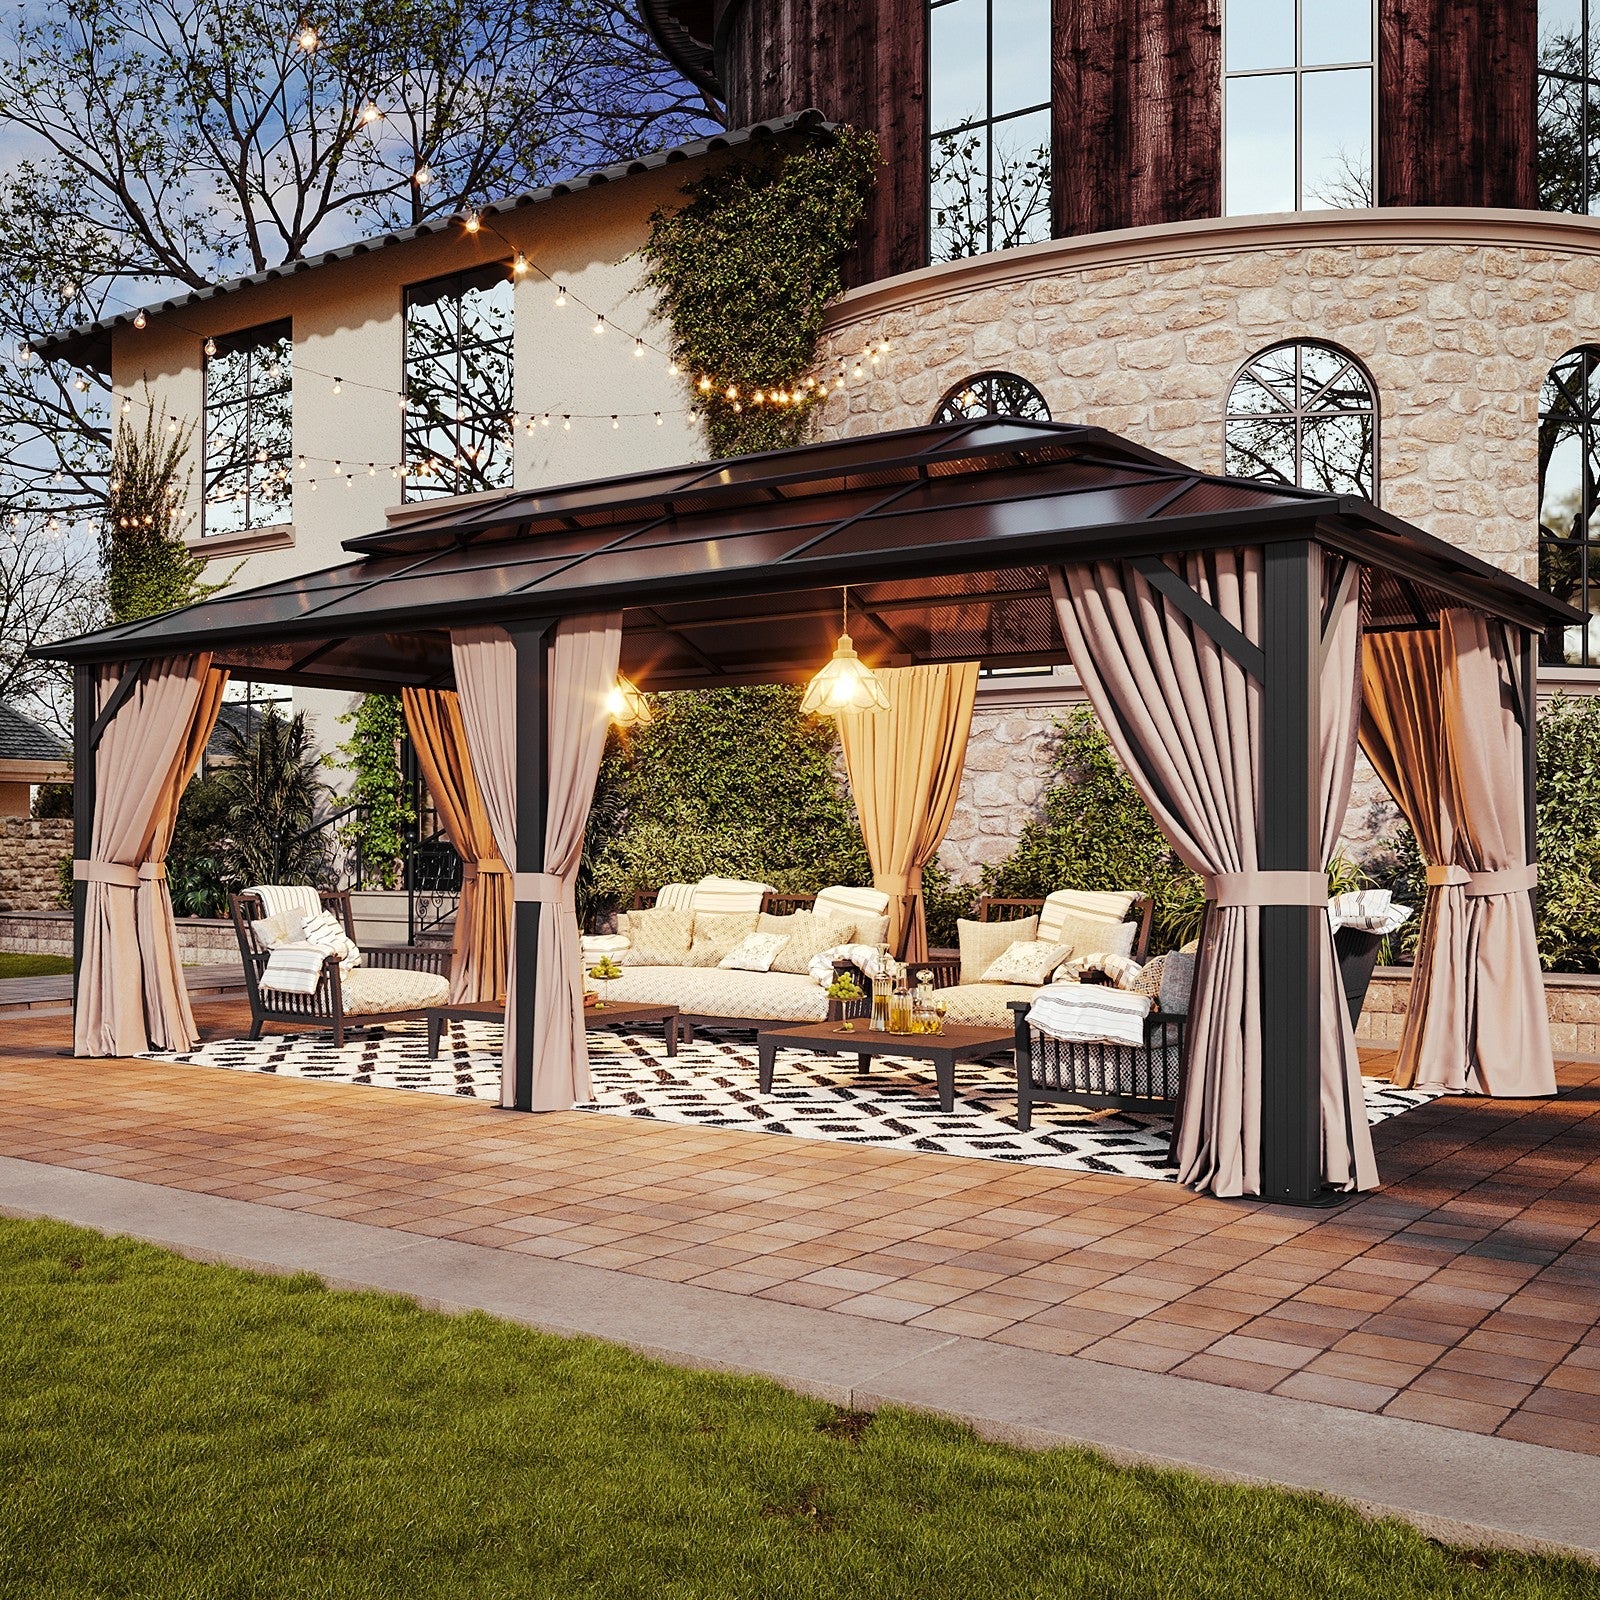 Polycarbonate Double Roof Hardtop Gazebo, Aluminum Frame with Curtains and Netting